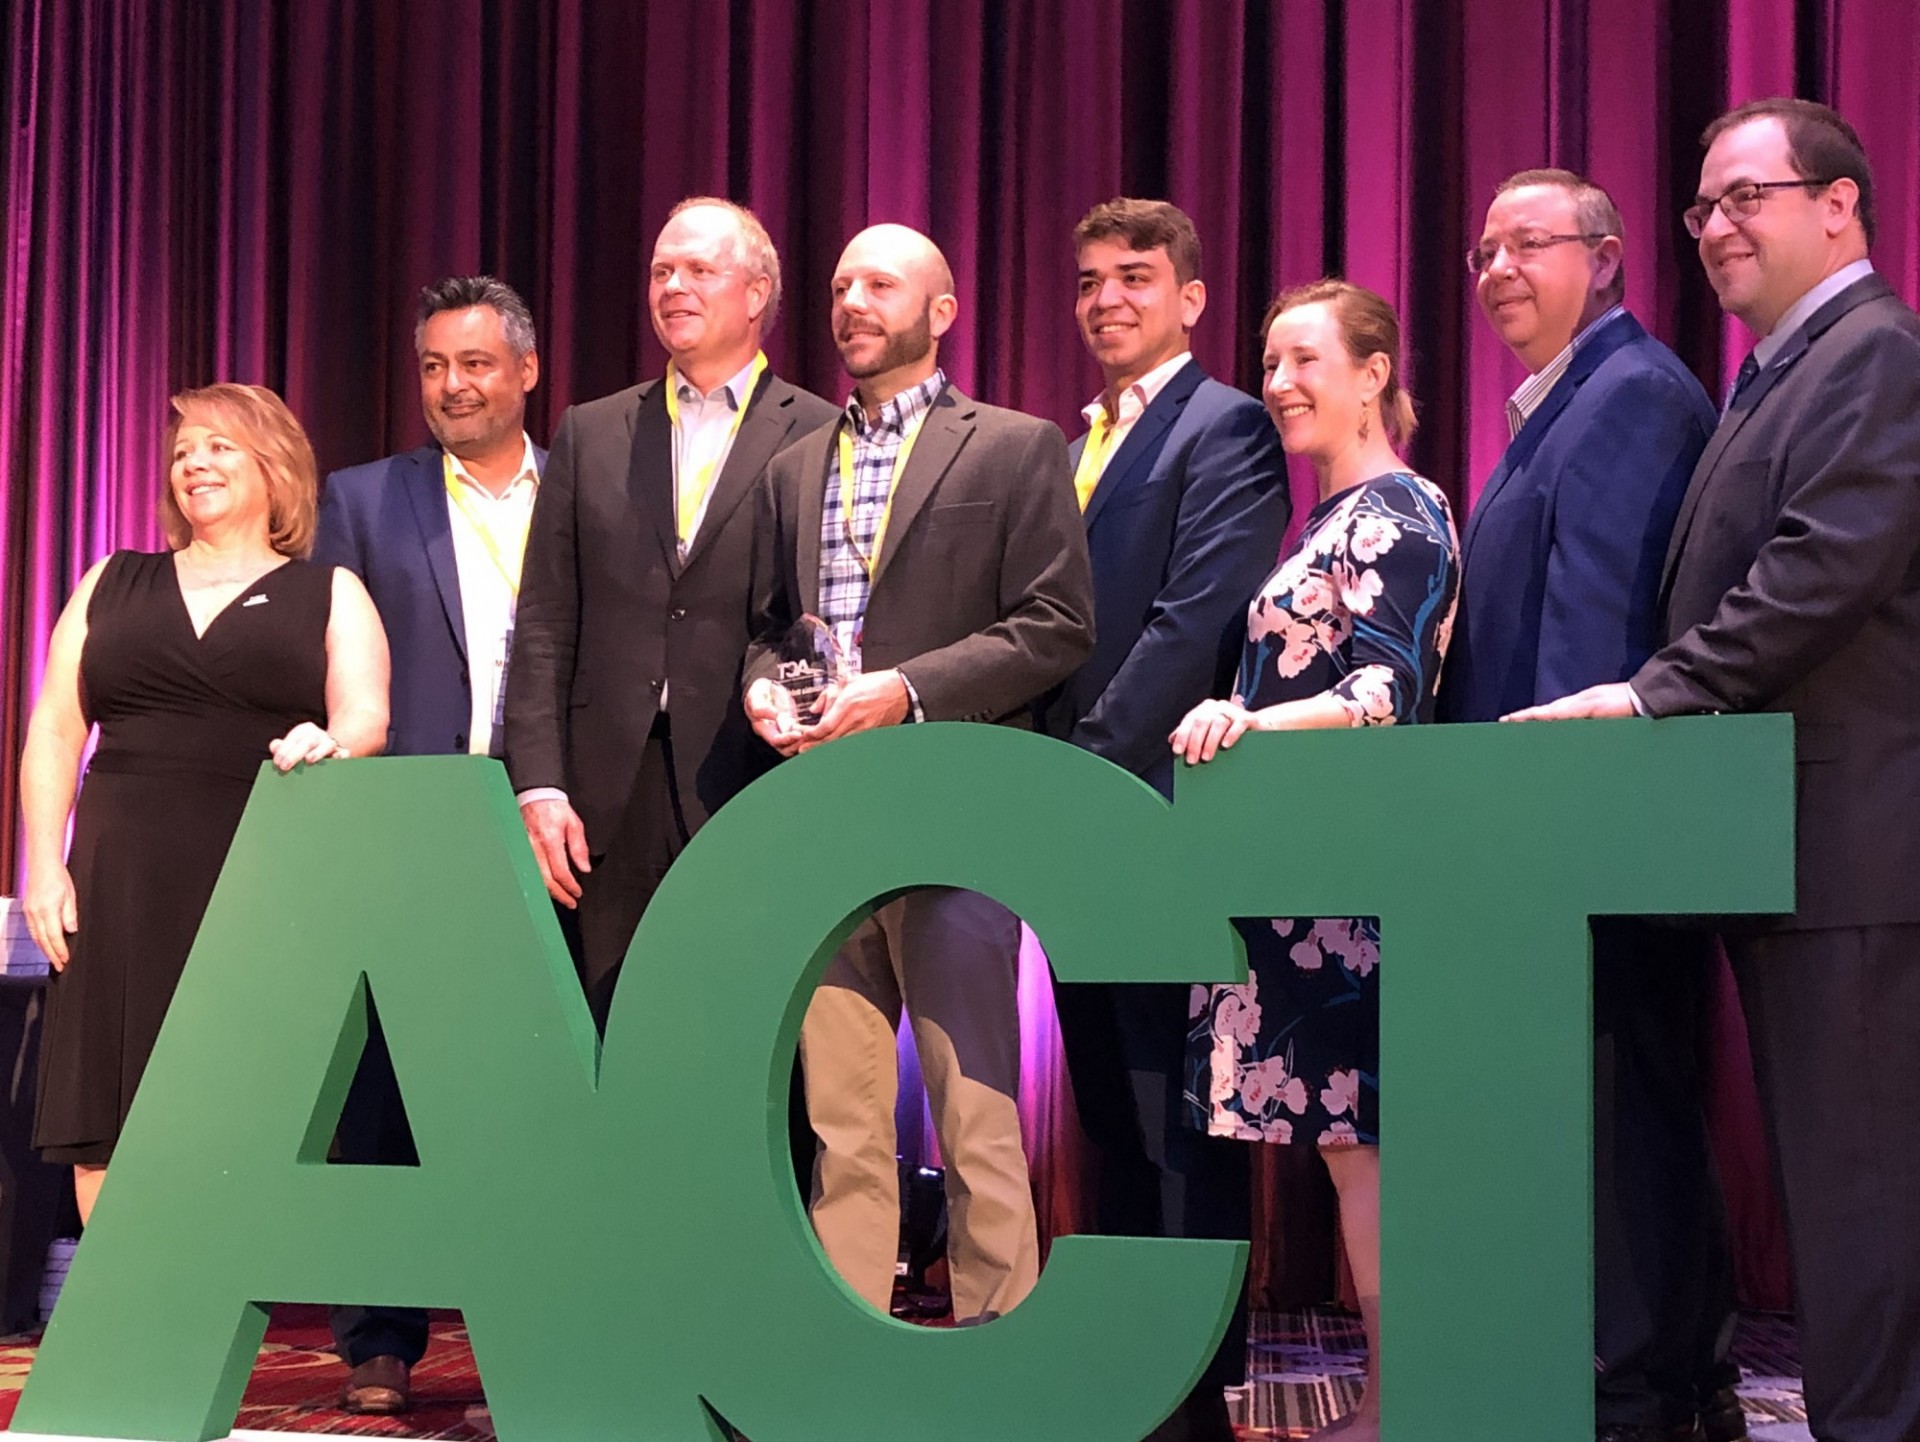 Columbia University representatives from the Transportation Office and the Office of Sustainability accept the award from ACT at the International Conference on August 7, 2019.